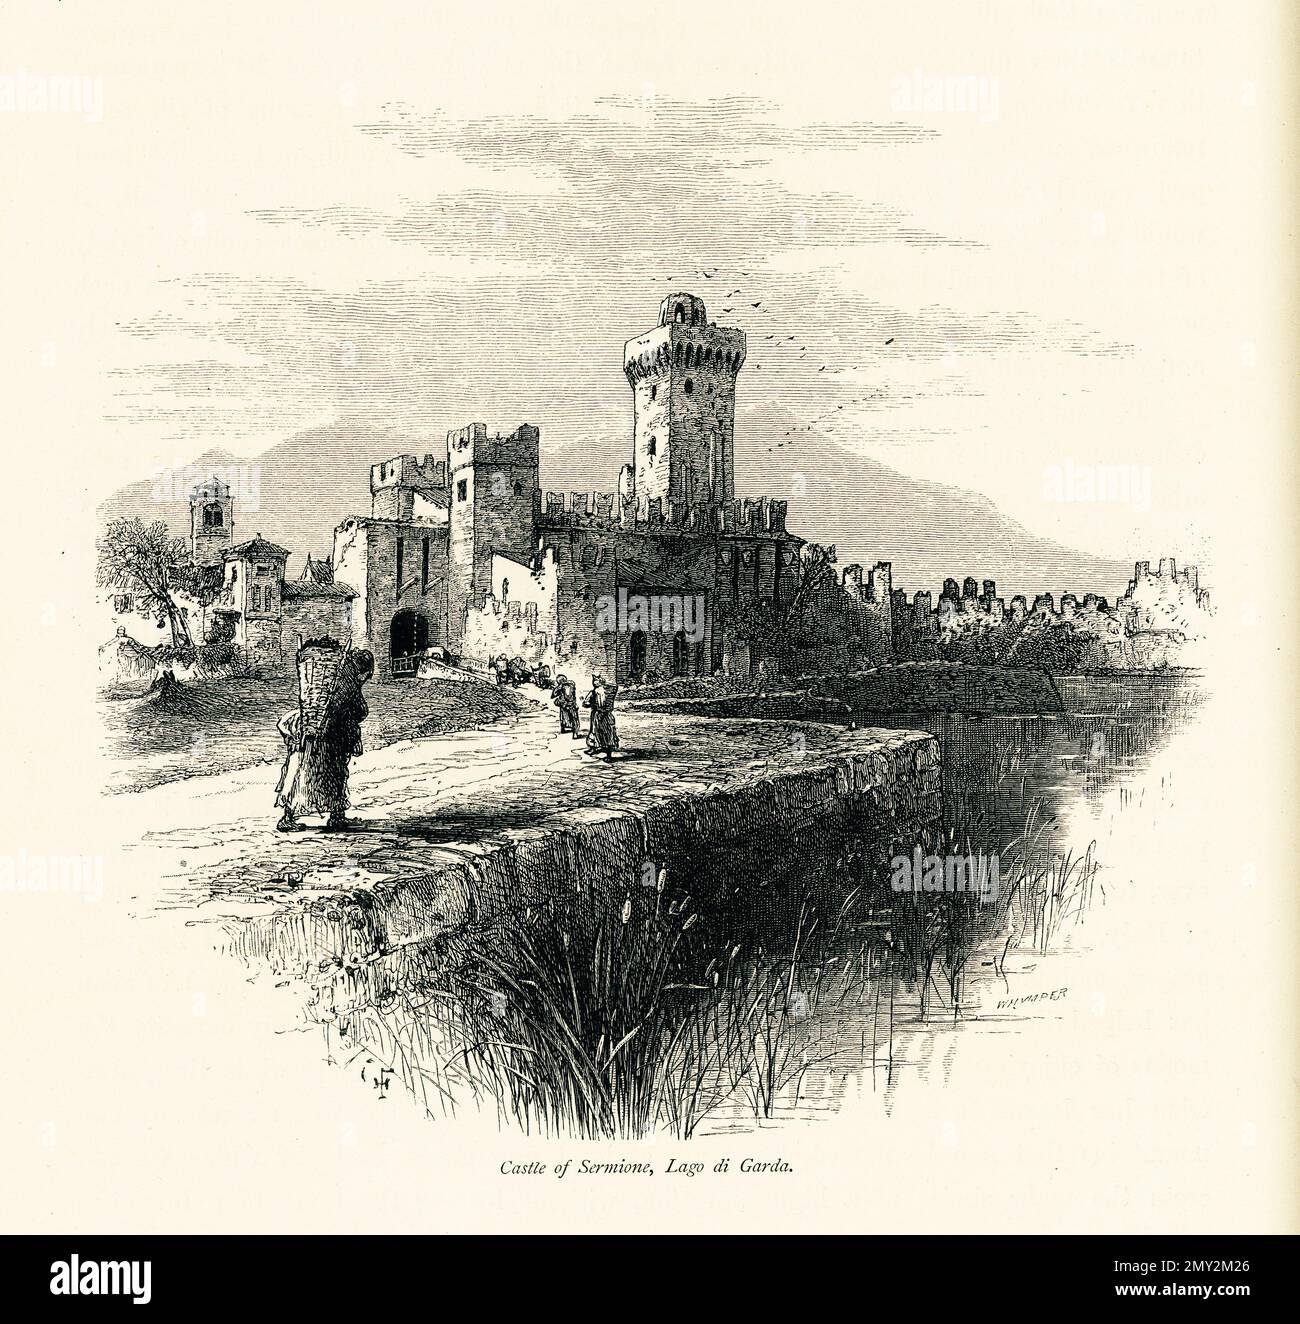 Antique engraving of the castle of Sirmione on the lower part of Lake Garda, Italy. Illustration published in Picturesque Europe, Vol. III (Cassell & Stock Photo